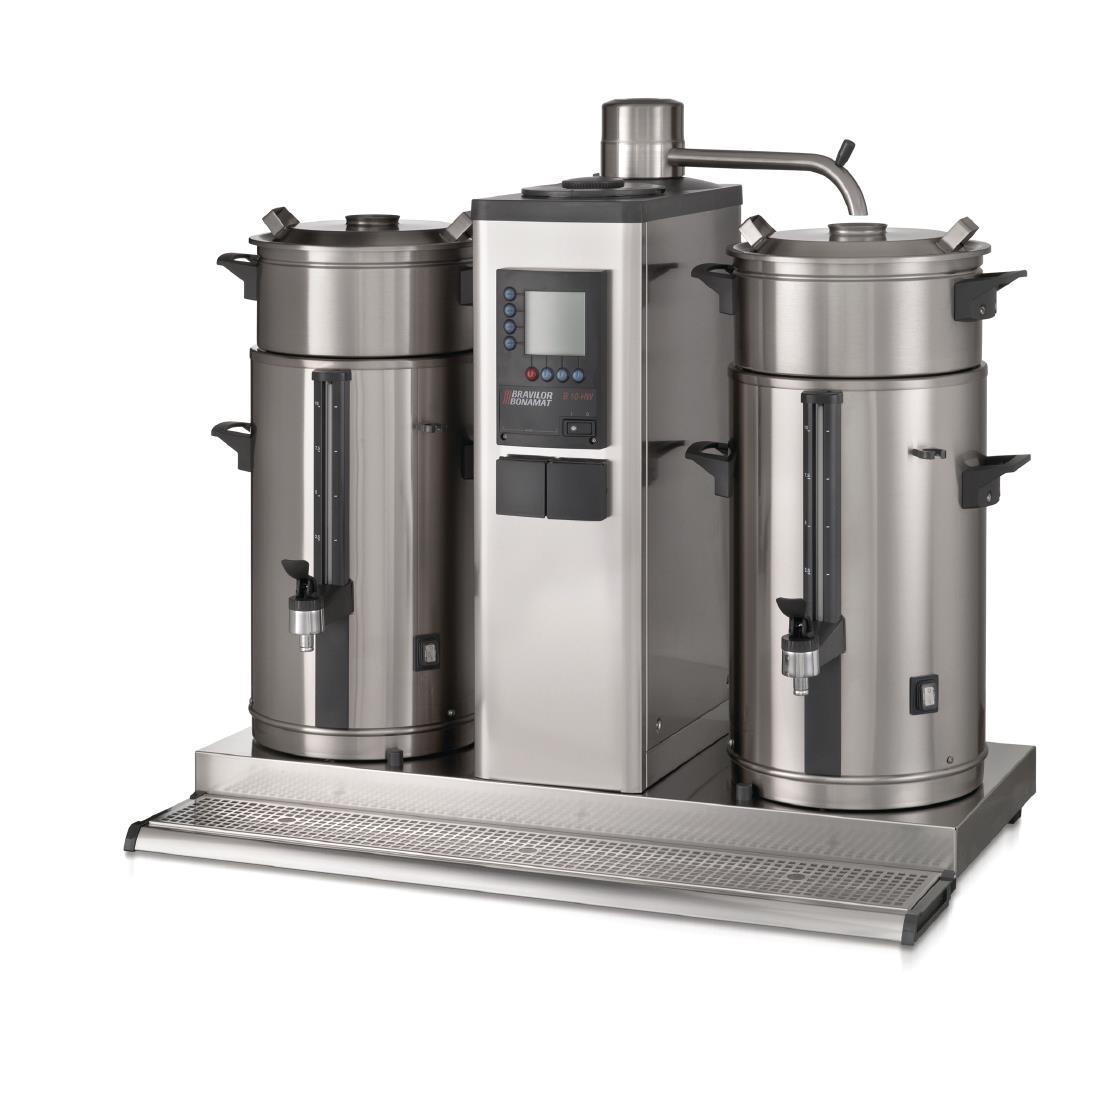 Bravilor B20 Bulk Coffee Brewer with 2x20Ltr Coffee Urns 3 Phase - DC681  - 1